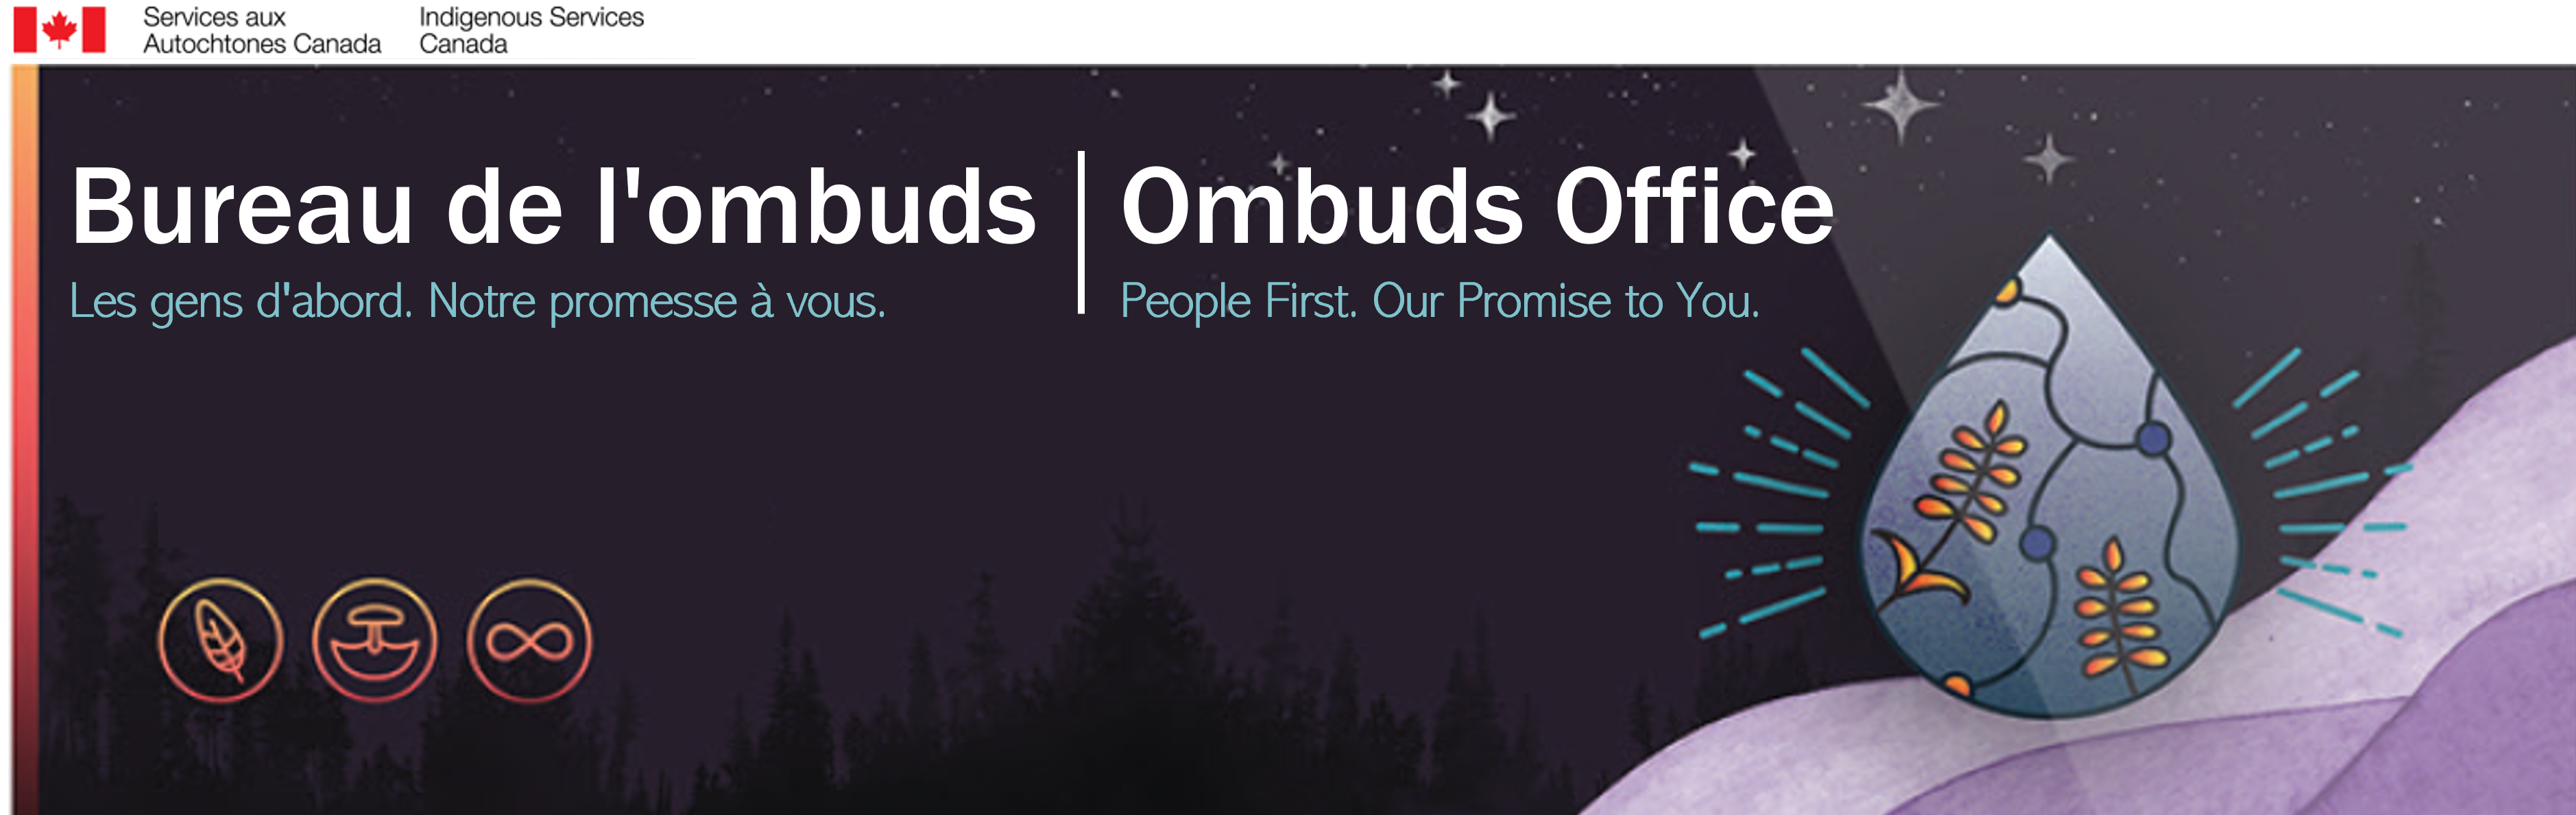 Ombuds Banner 3.png